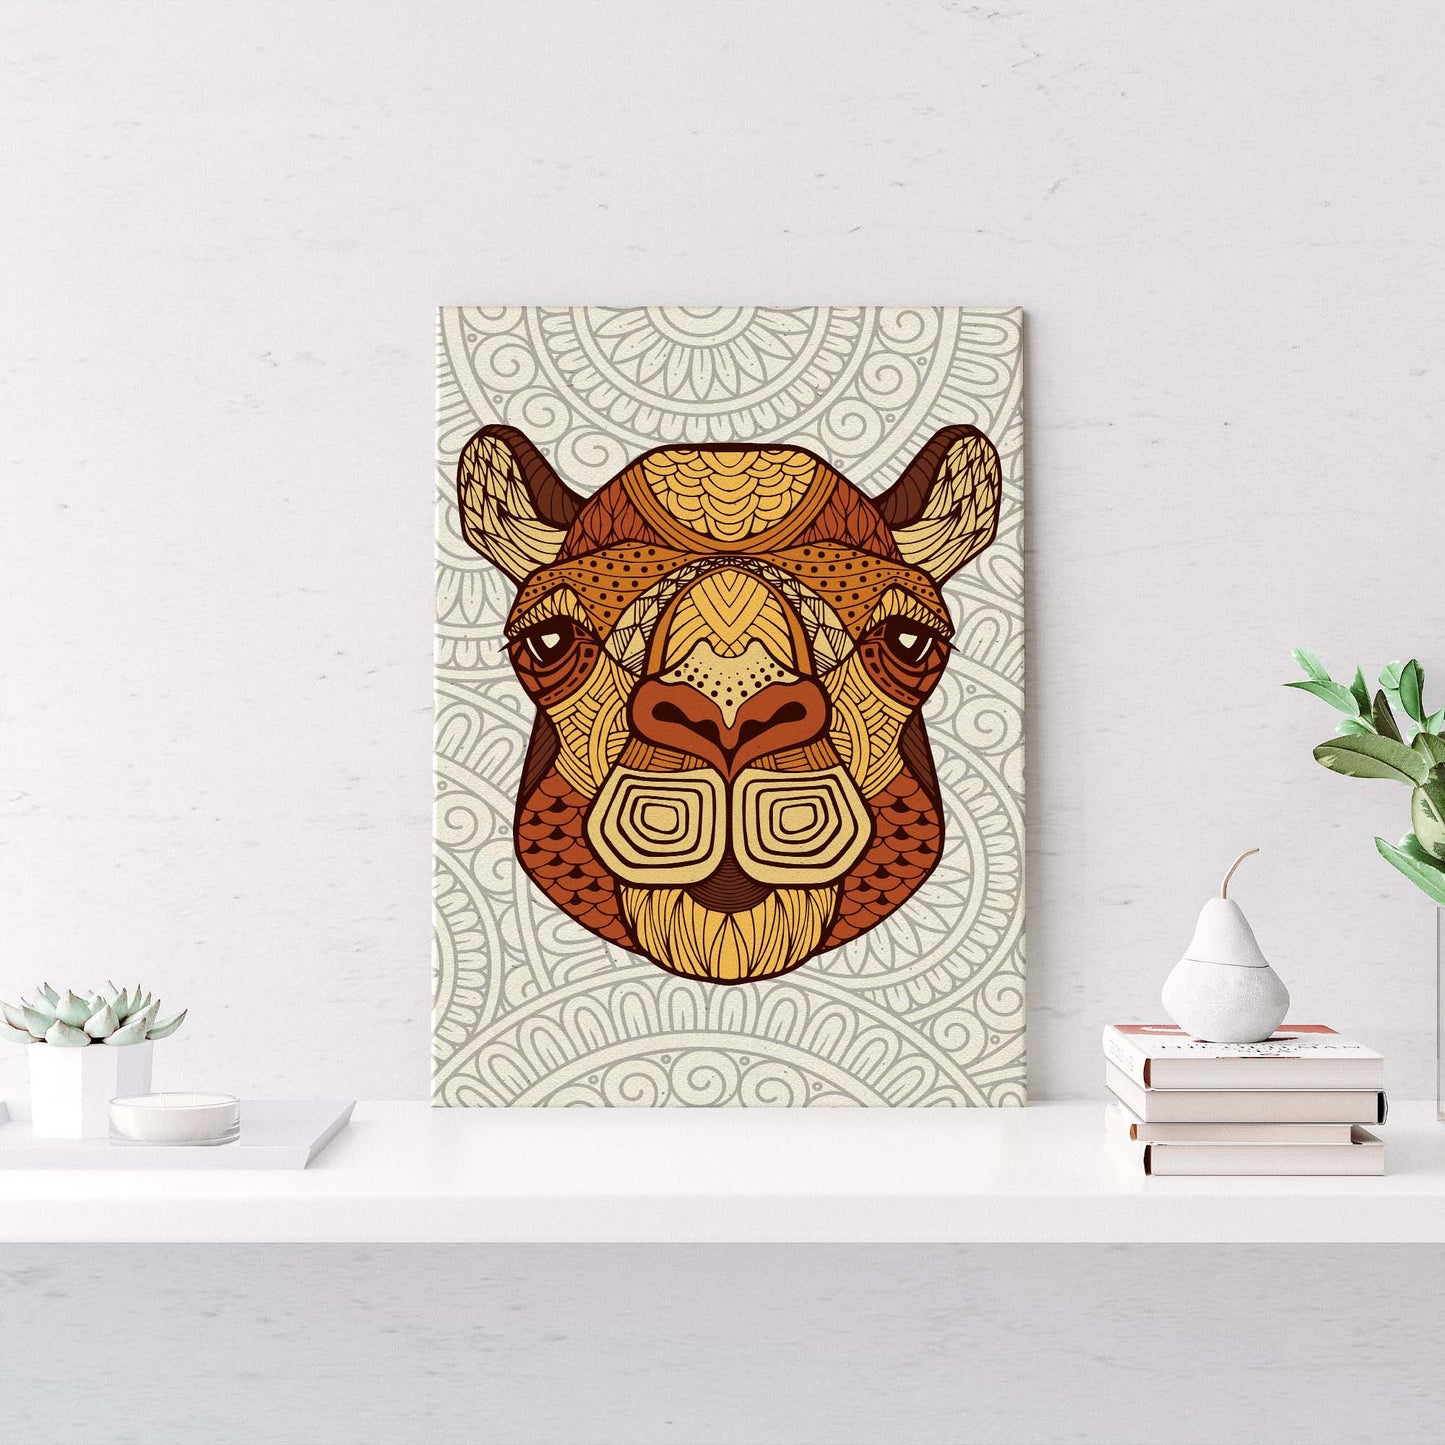 Zentangle Camel Head Canvas Wall Art Style 1 - Image by Tailored Canvases